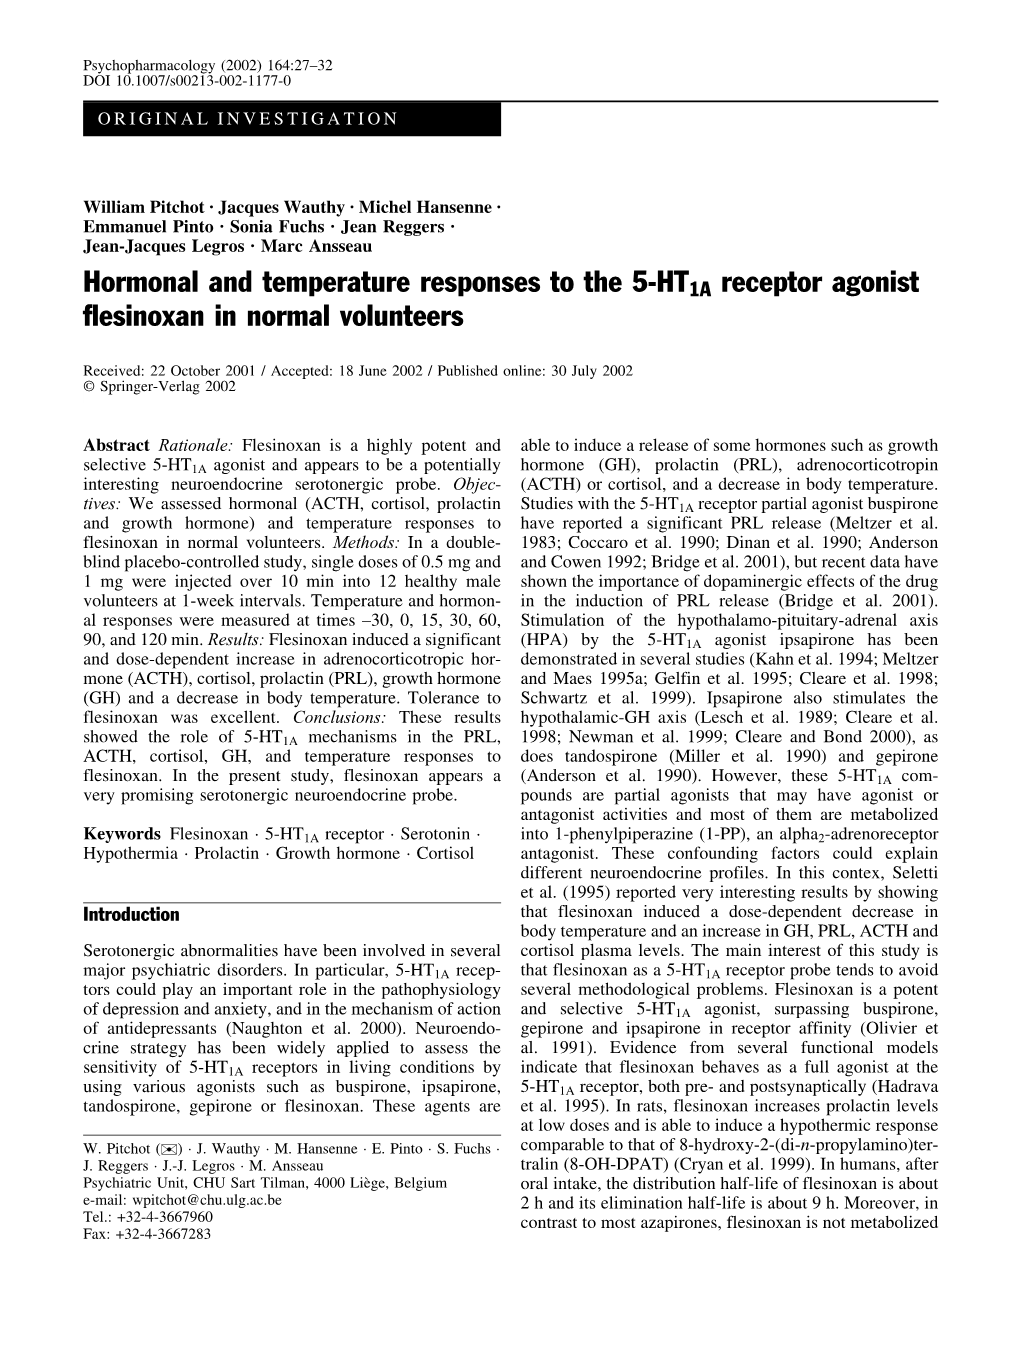 Hormonal and Temperature Responses to the 5-HT1A Receptor Agonist Flesinoxan in Normal Volunteers